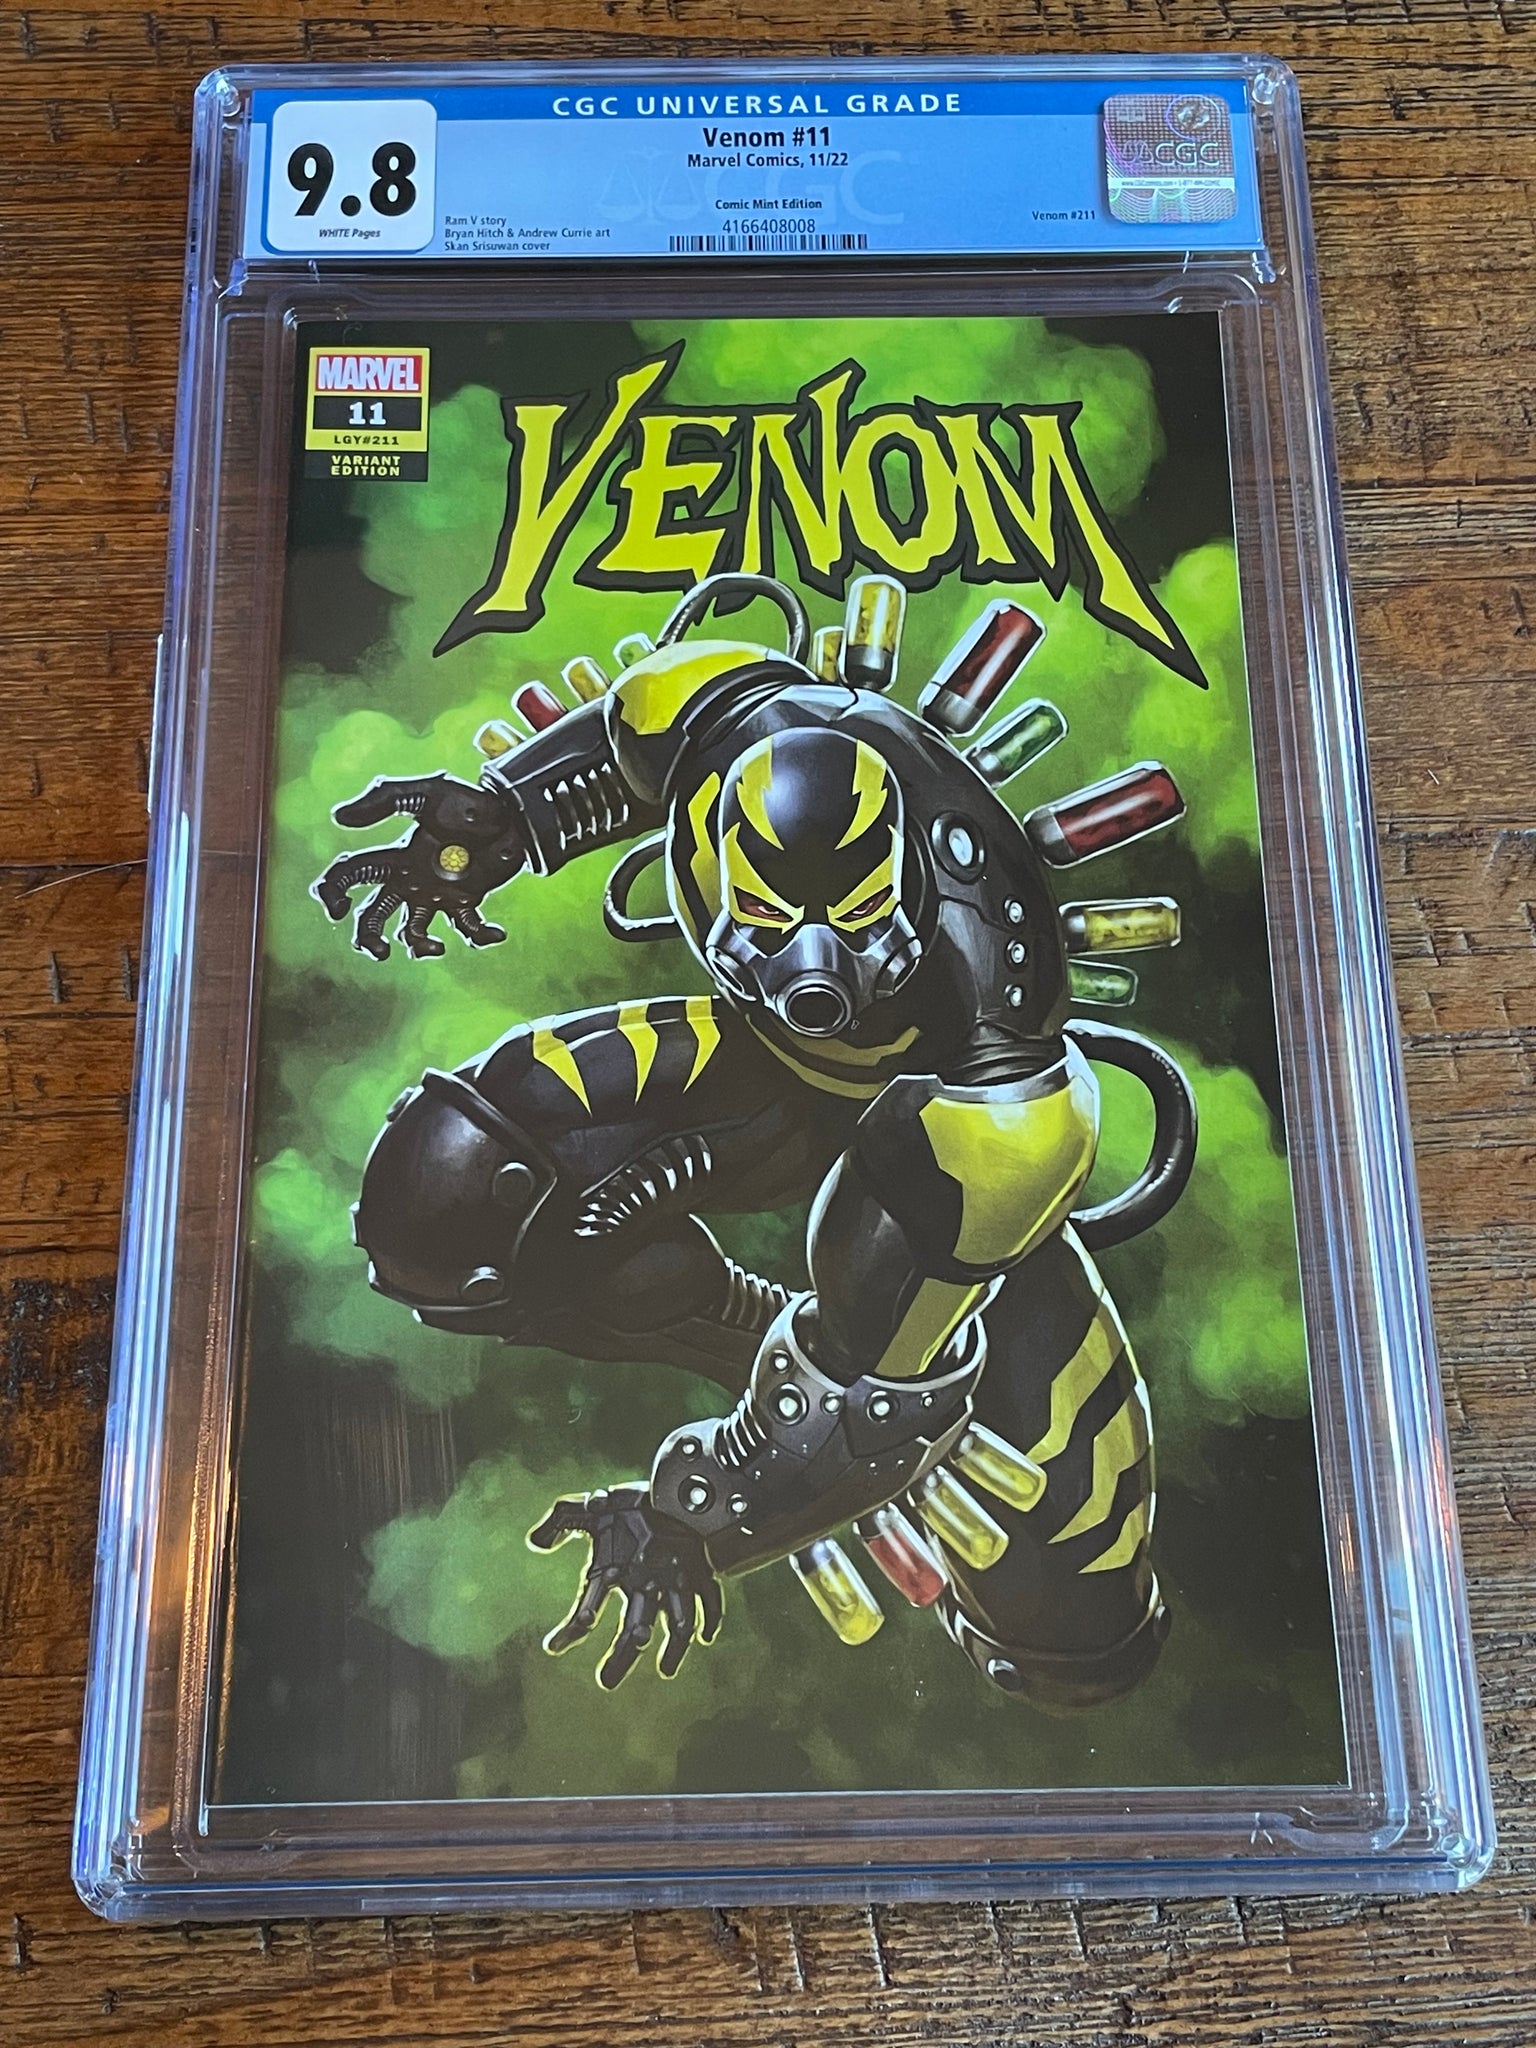 VENOM #11 CGC 9.8 SKAN SRISUWAN EXCL HOMAGE VARIANT LIMITED TO 600